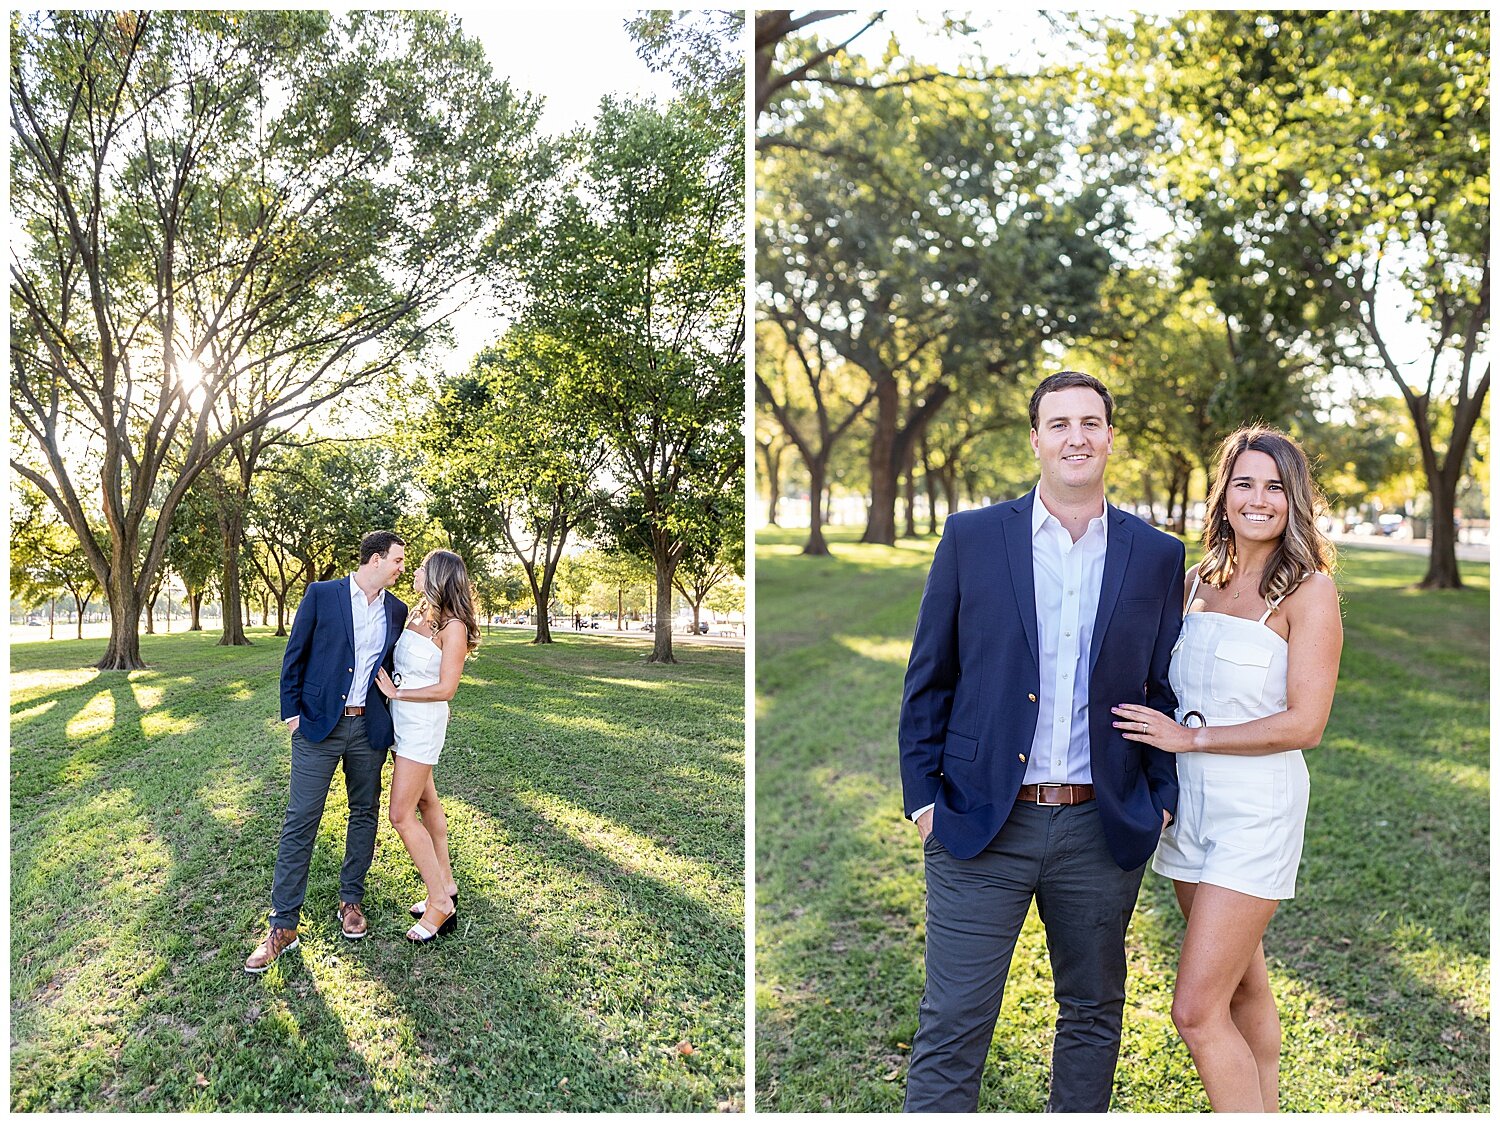 Haylie Chris National Mall Engagement Session 2020 Living Radiant Photography_0003.jpg